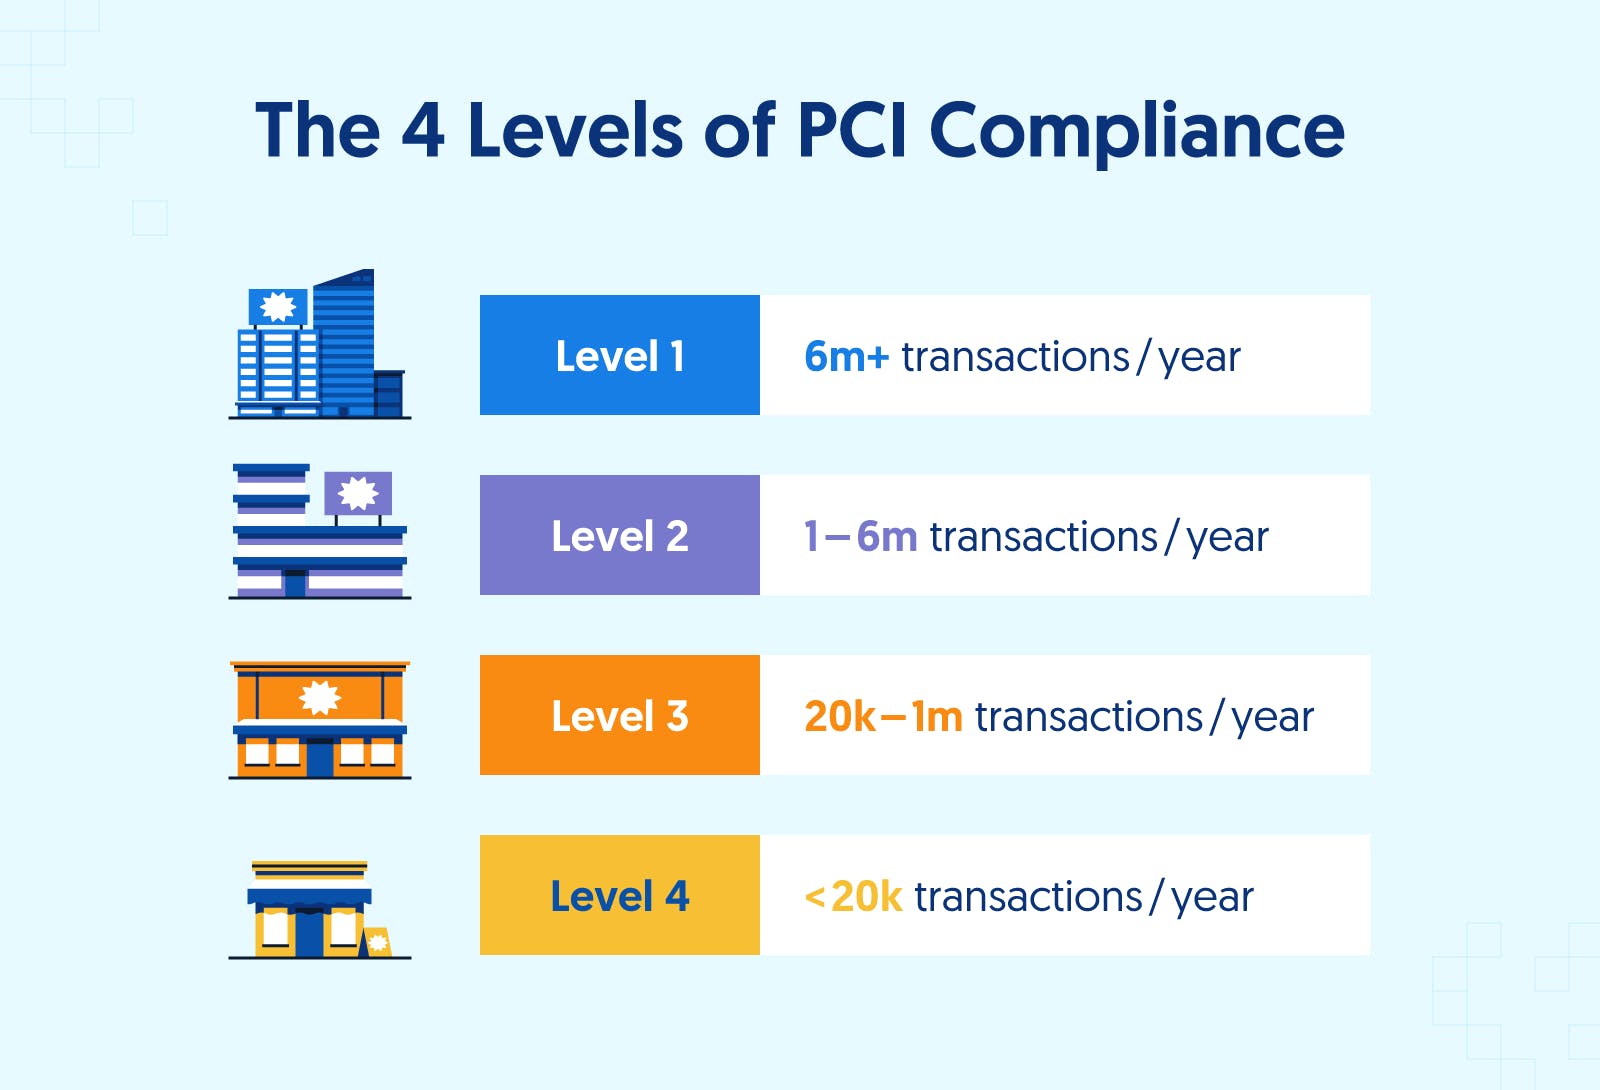 The 4 levels of PCI compliance and IT Support for Network Management.